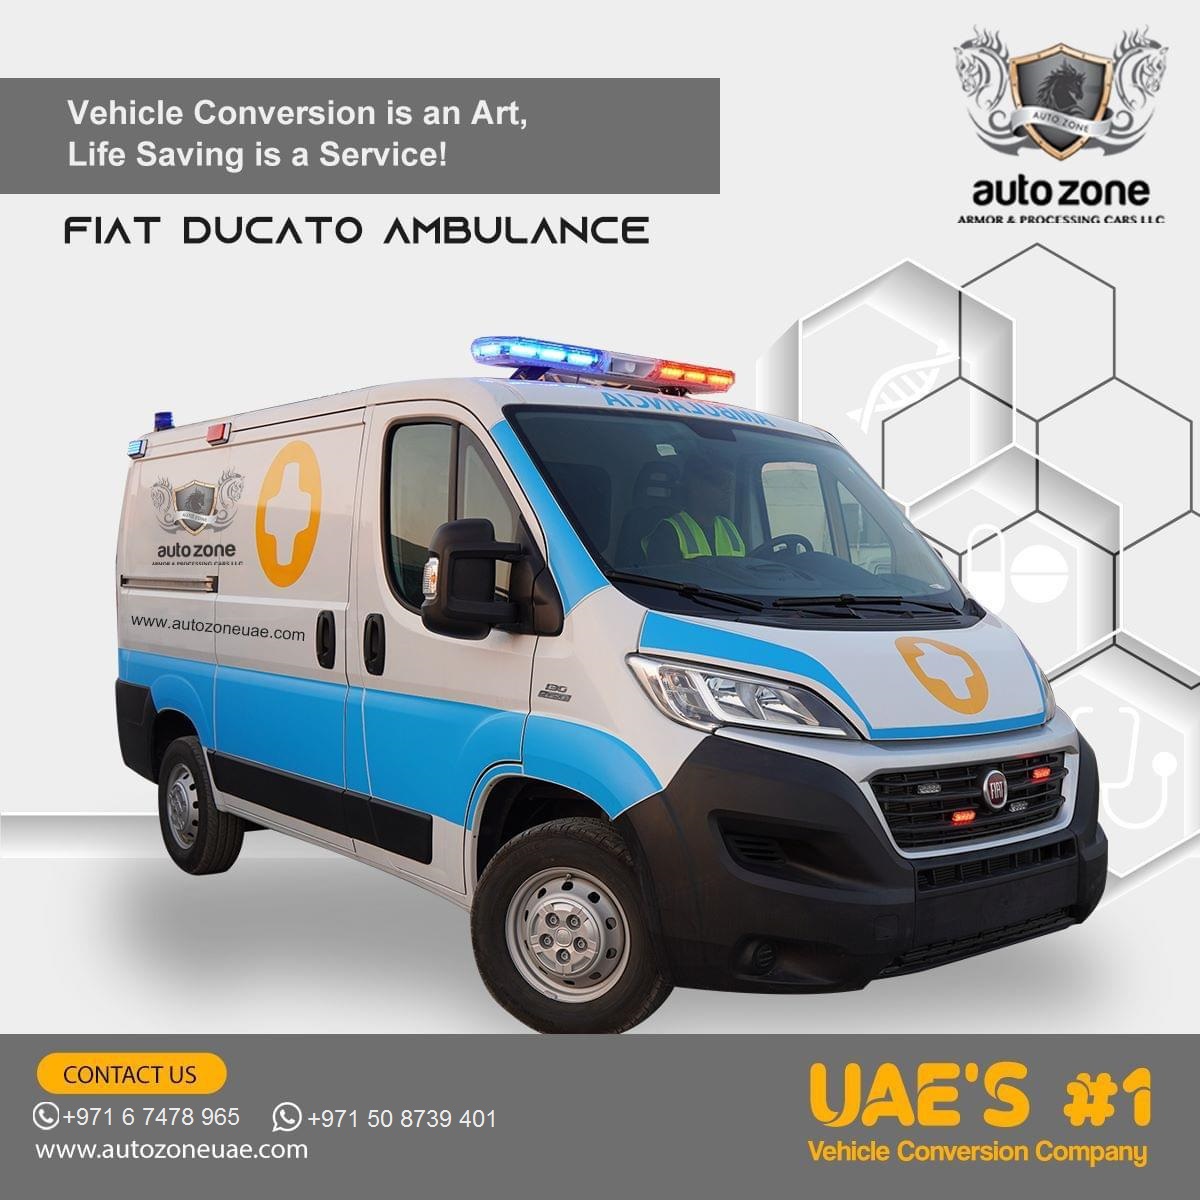 New Fiat Ducato Ambulance for sale !!!
 'AutoZone' the Vehicle Conversion Leader's in UAE converts all kind of vehicles into Specialized Ambulances for all kind of emergency needs!
#ambulanceuae #autozonuae #dubaiambulance #ambulanceafrica #ambulancecars #vehicleexport #newcars